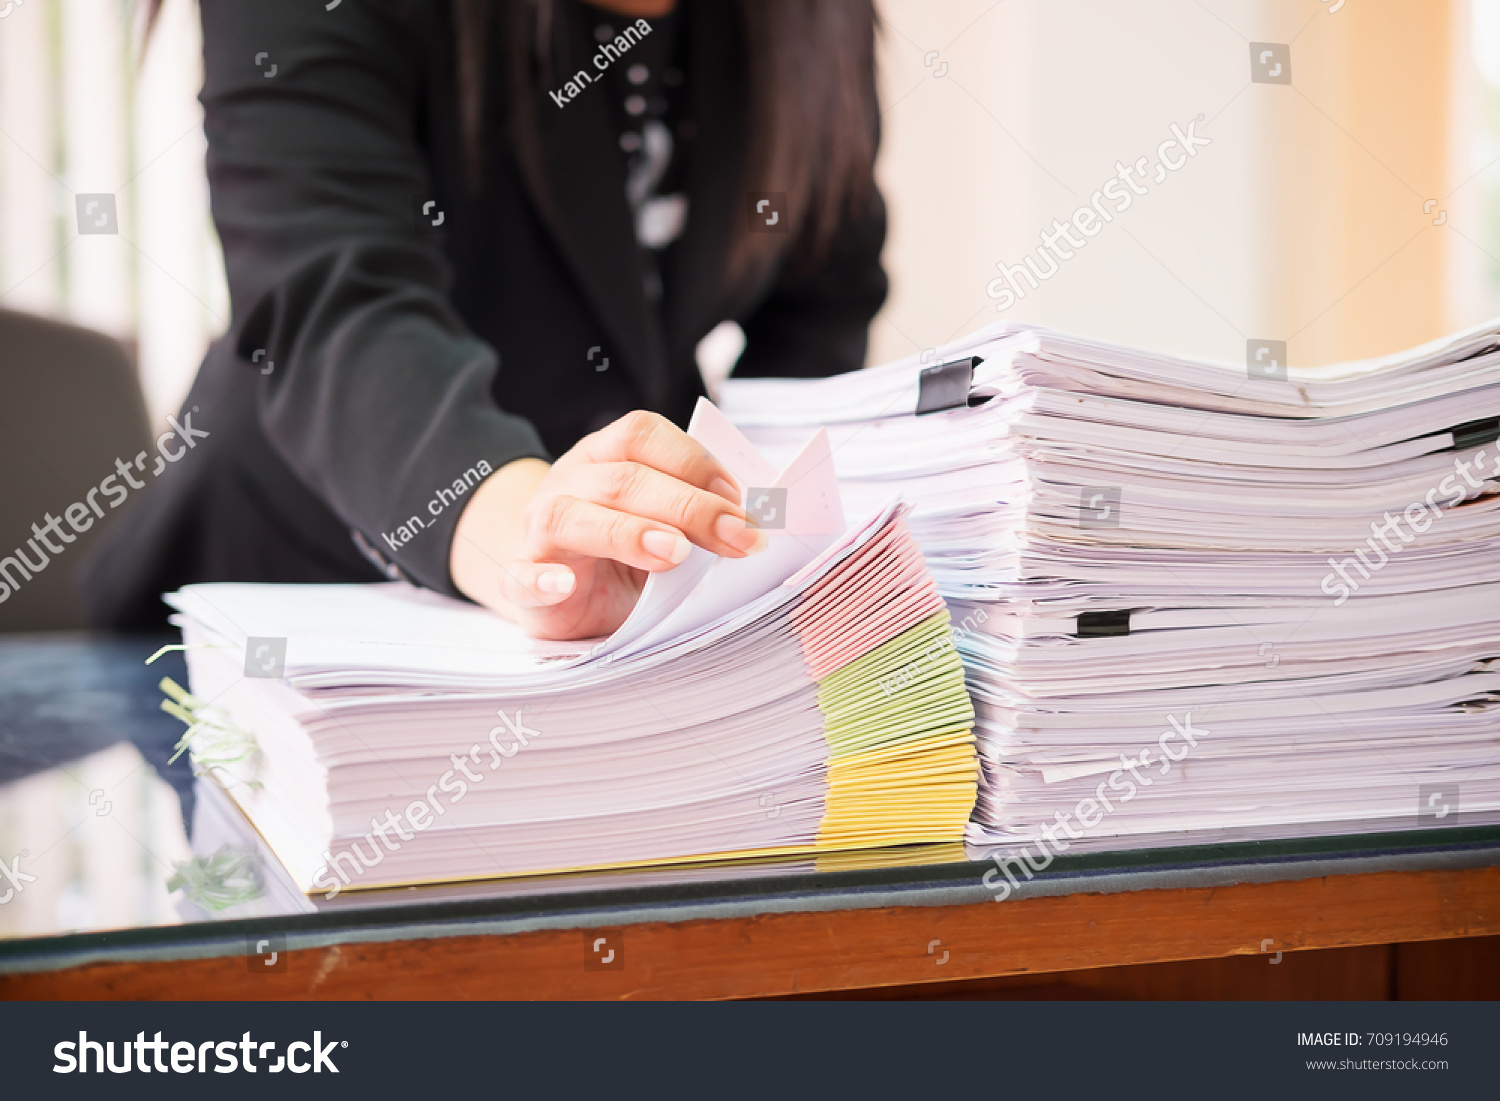 Asian business woman office workers holding are arranging documents of unfinished documents on office desk,Stack of business paper,document management,Businesswoman examining documents
 #709194946